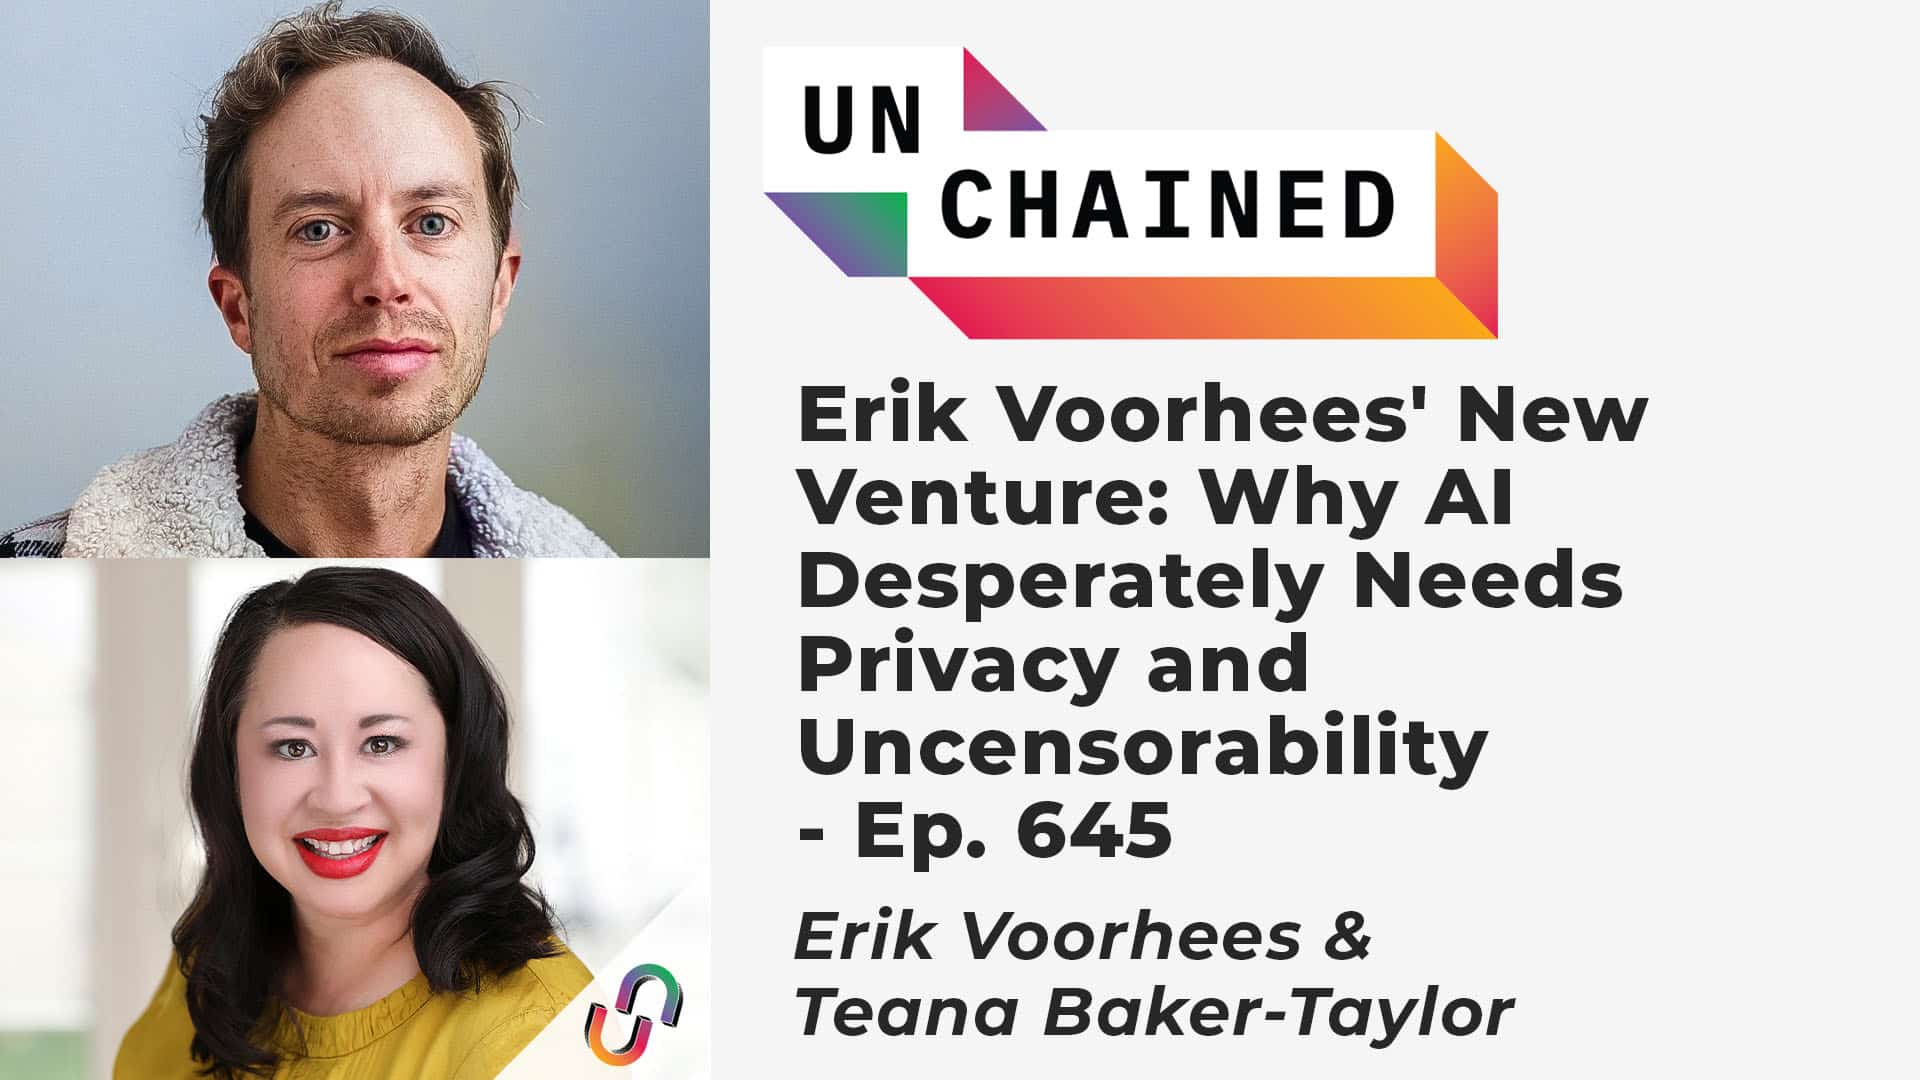 Erik Voorhees' New Venture: Why AI Desperately Needs Privacy and Uncensorability - Ep. 645